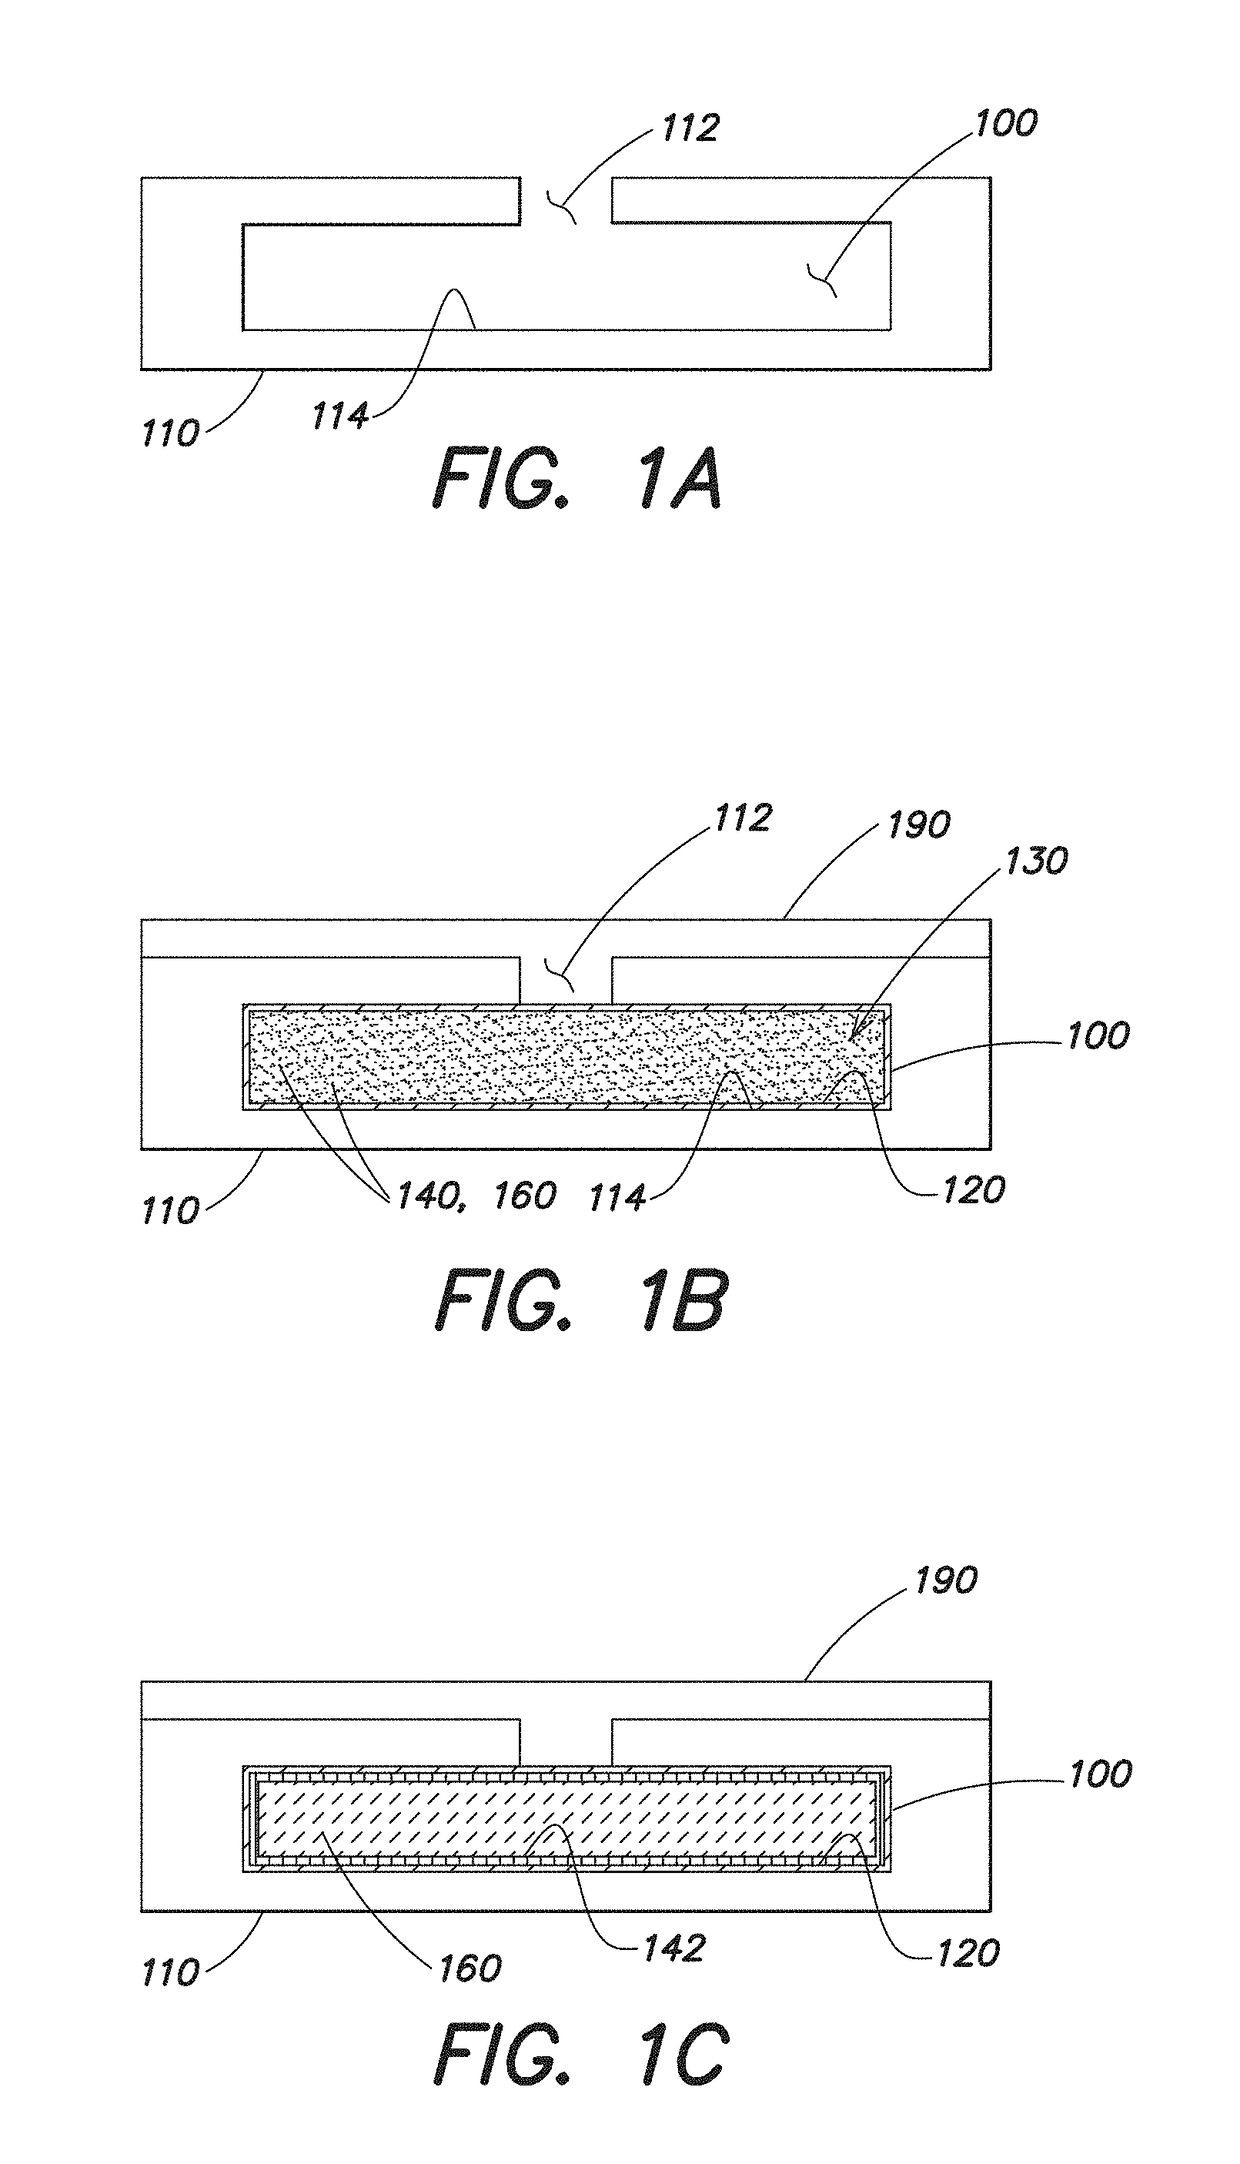 Methods and Apparatus for Liquid Crystal Photoalignment